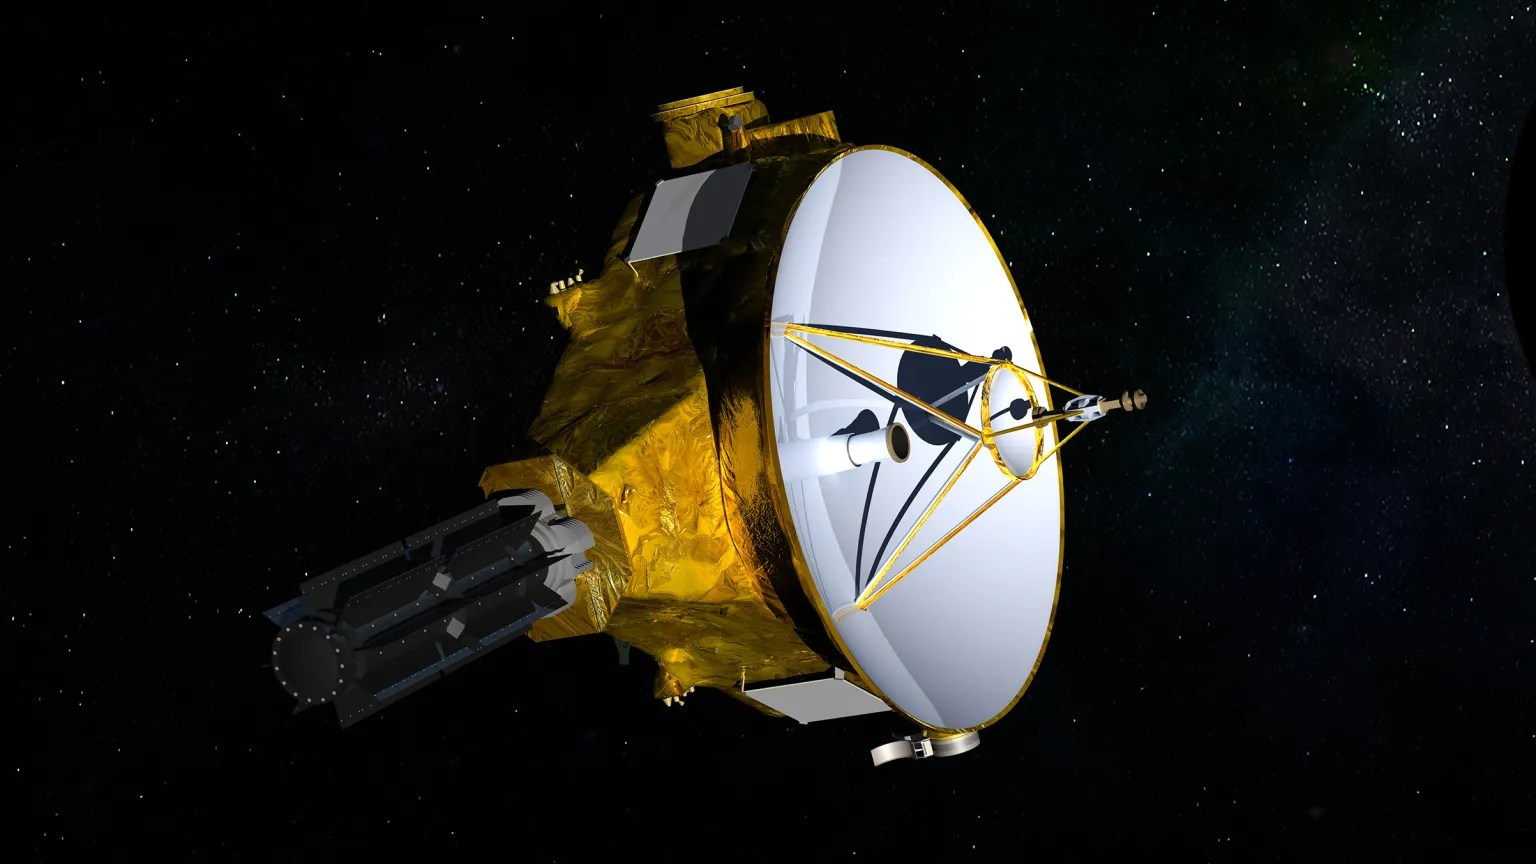 Illustration of a gold spacecraft with a silver dish on the front floating in space